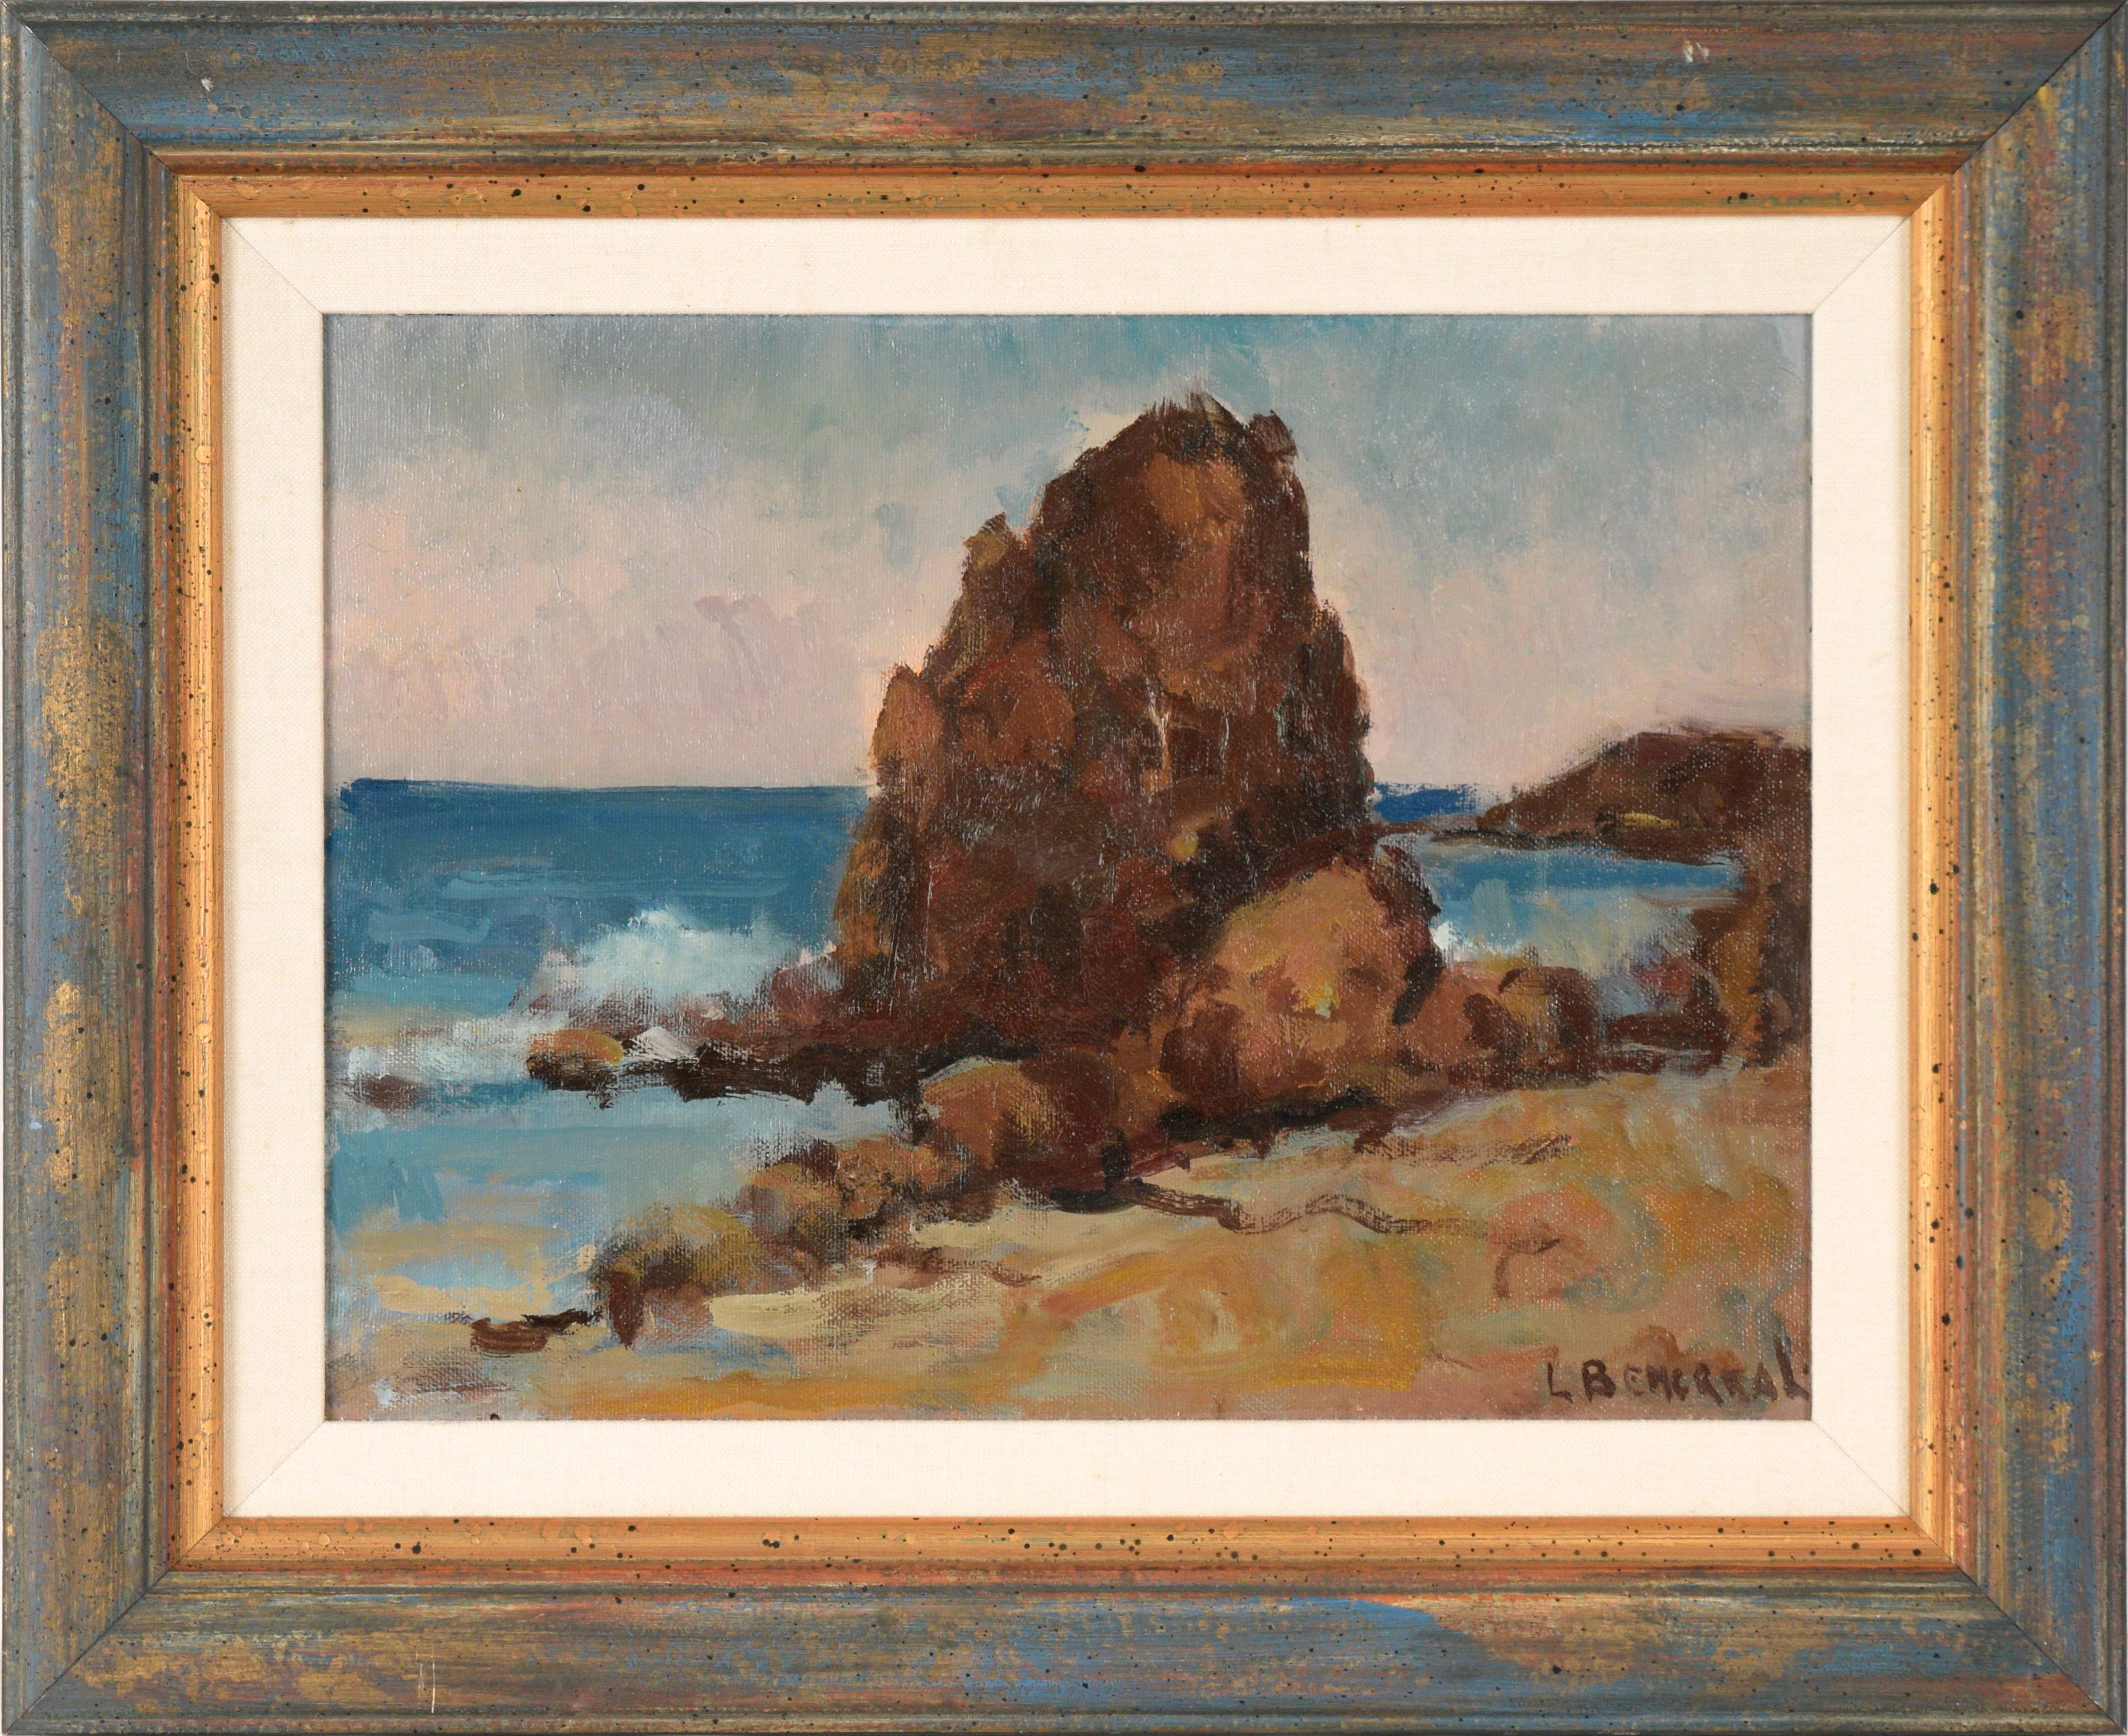 Unknown Landscape Painting - Rocks at Cannon Beach, Oregon - Seascape in Oil on Linen